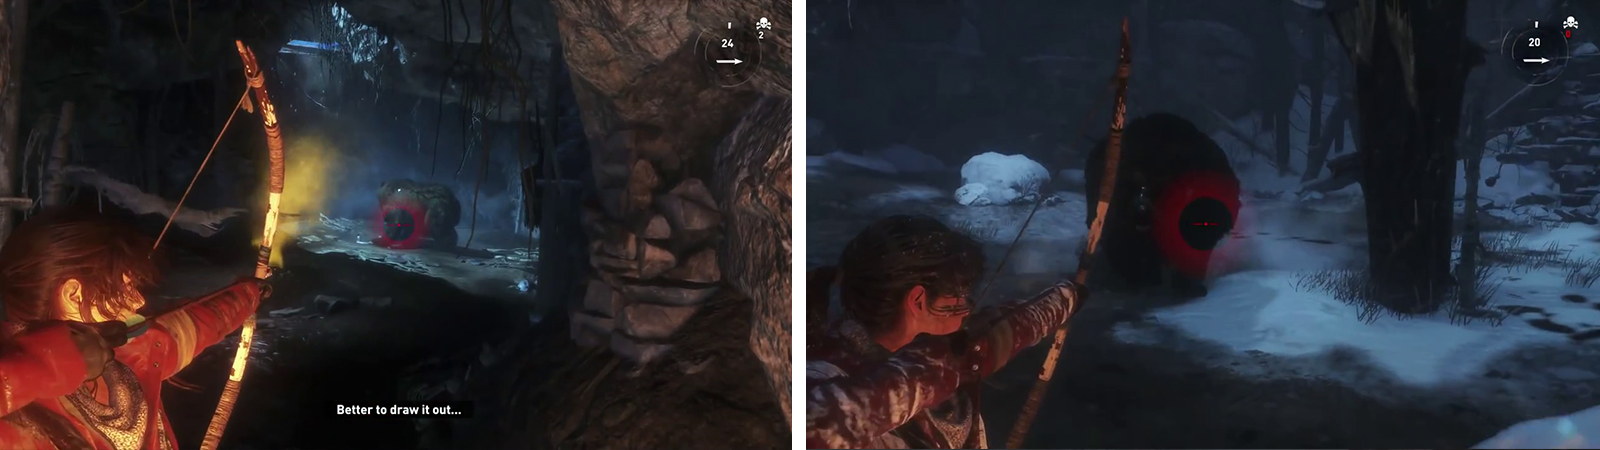 Enter the cave and use Poison Arrows on the bear (left). Draw it out of the cave to fight in the clearing (right).